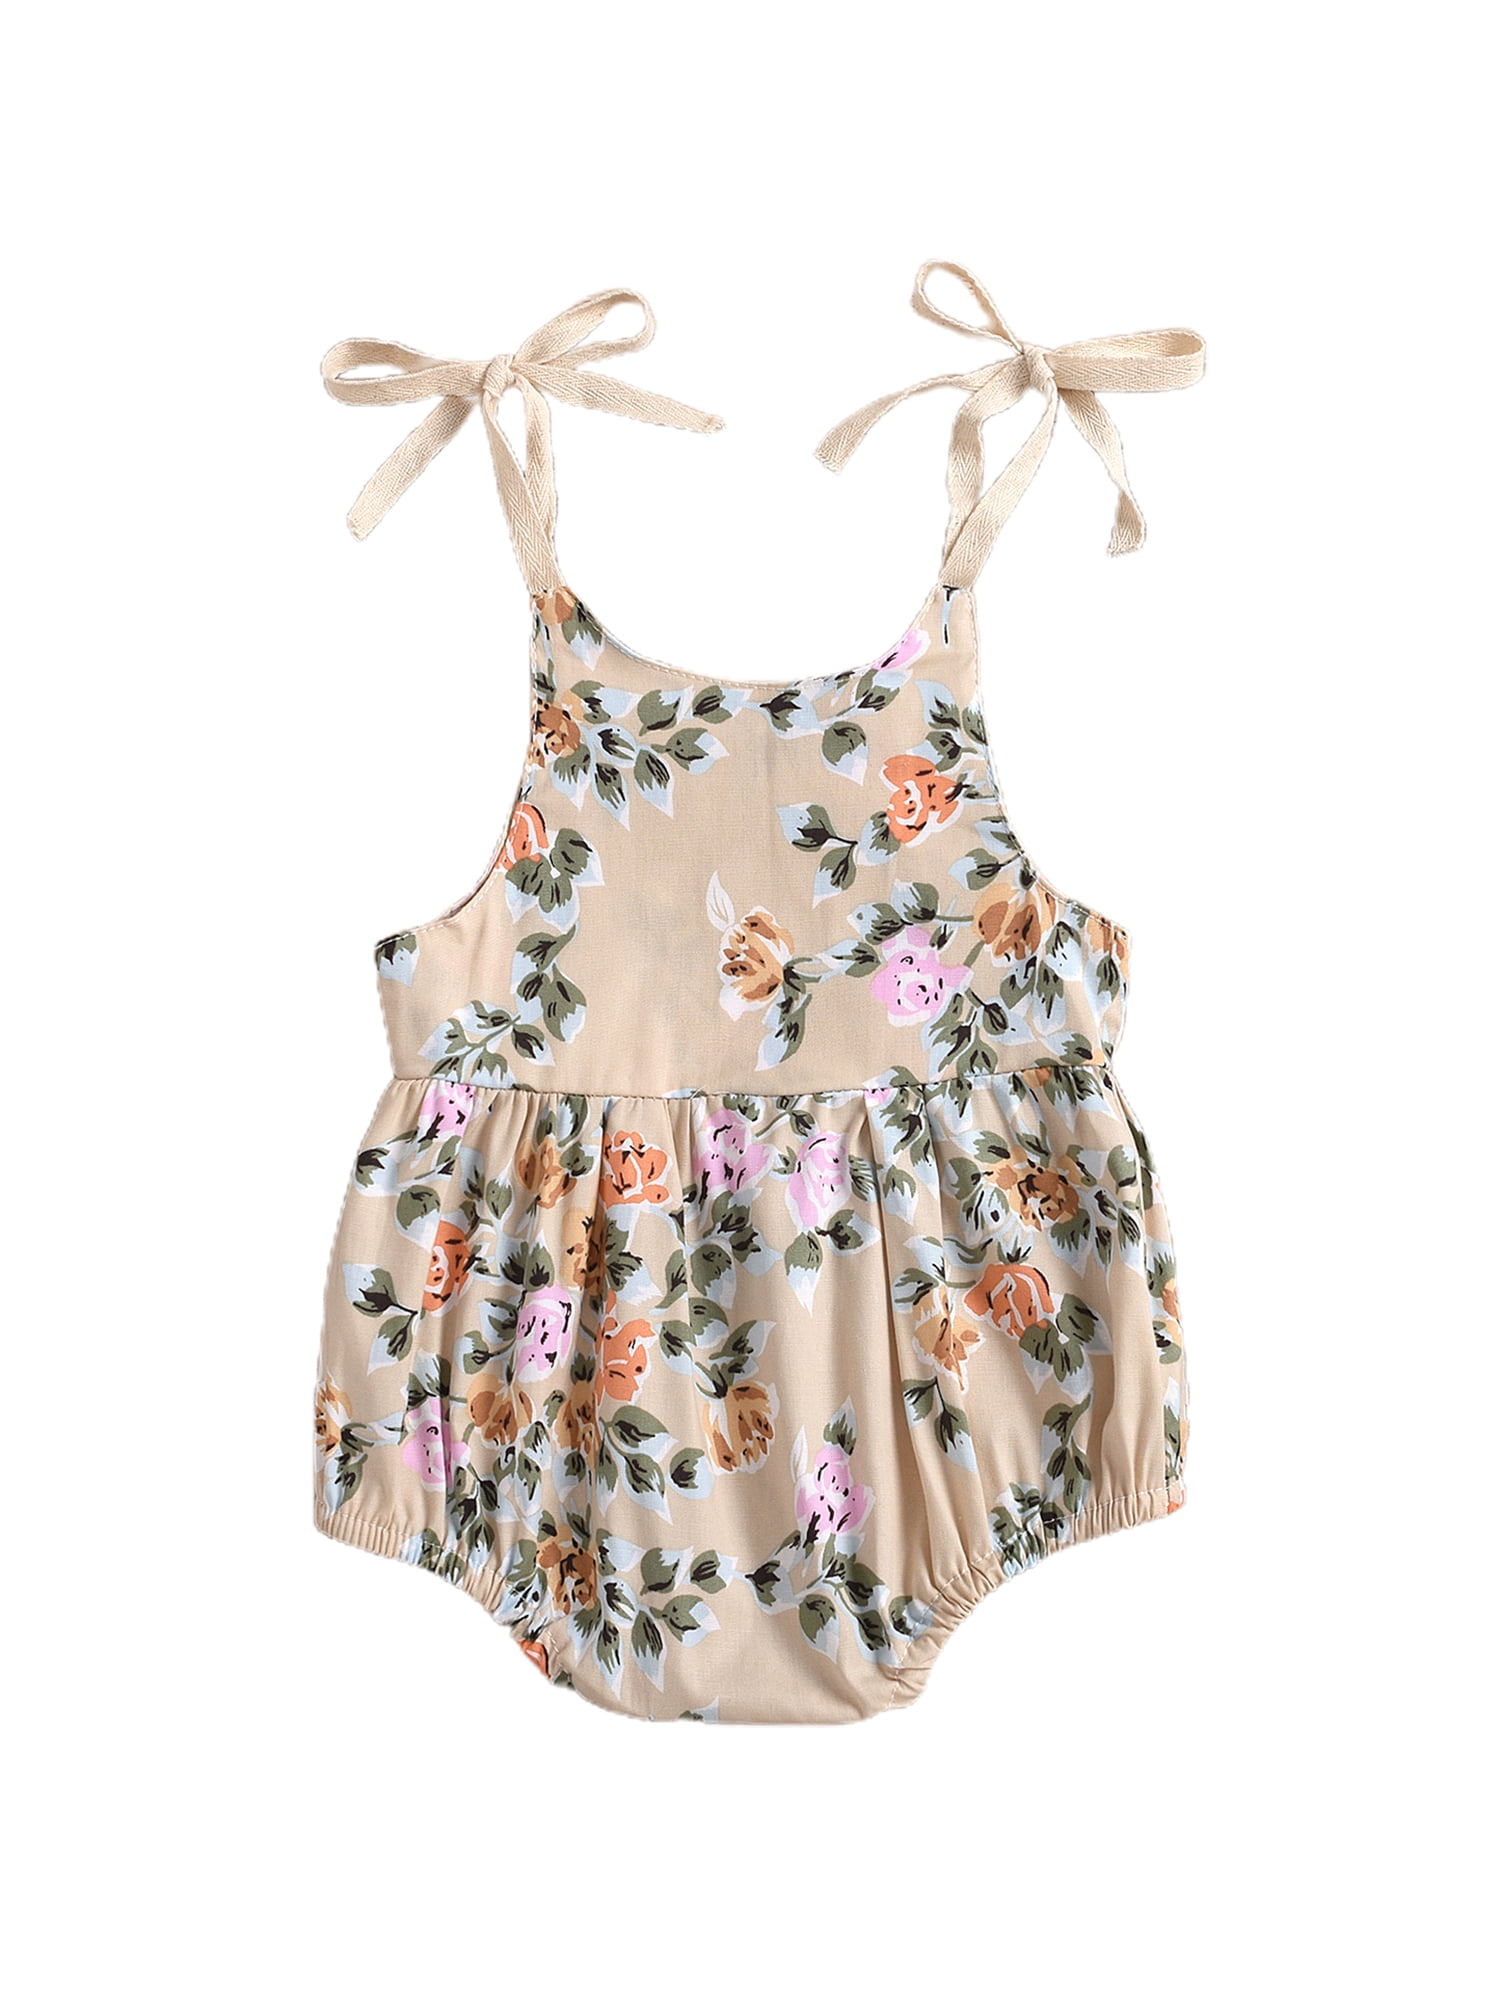 Newborn Baby Girl Strap Romper Bodysuit Sunsuit Floral Summer Clothes Outfits